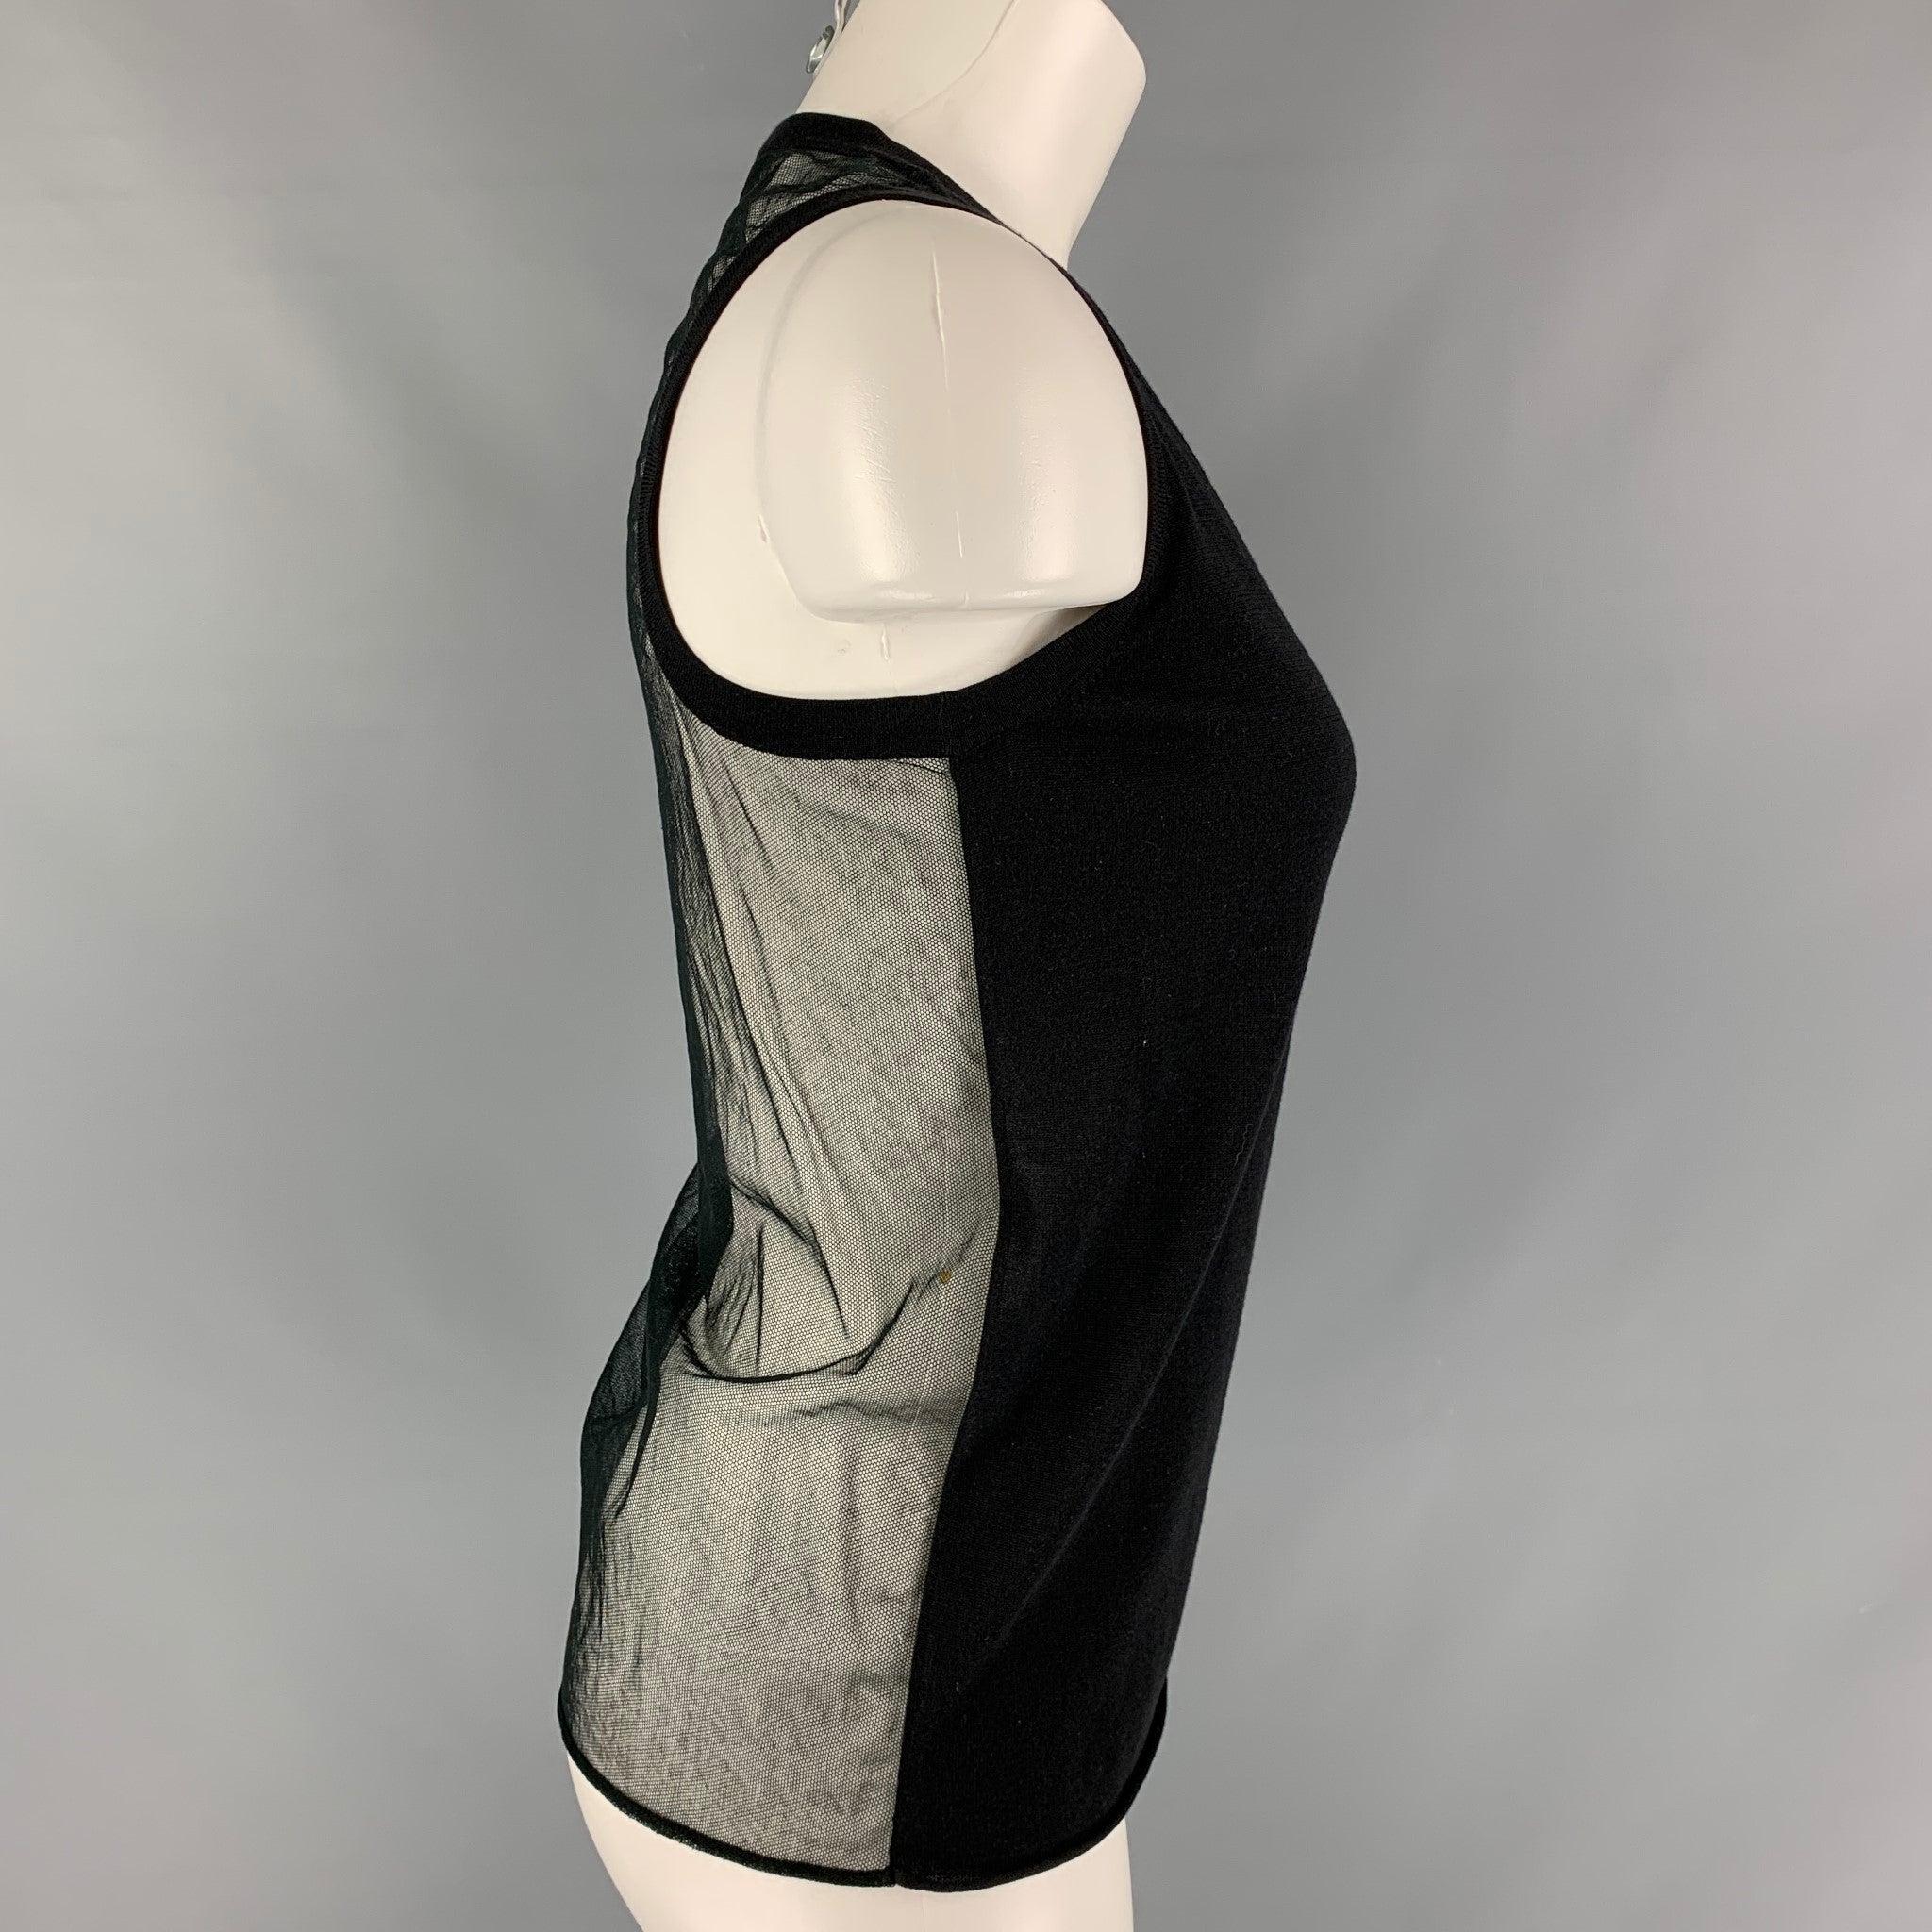 PORTS 1961 tank top black cotton and silk fabric featuring a see through style at back. Excellent Pre-Owned Condition. 

Marked:   S 

Measurements: 
  Bust: 37 inches Length: 24 inches 

  
  
 
Reference: 116440
Category: Casual Top
More Details
 